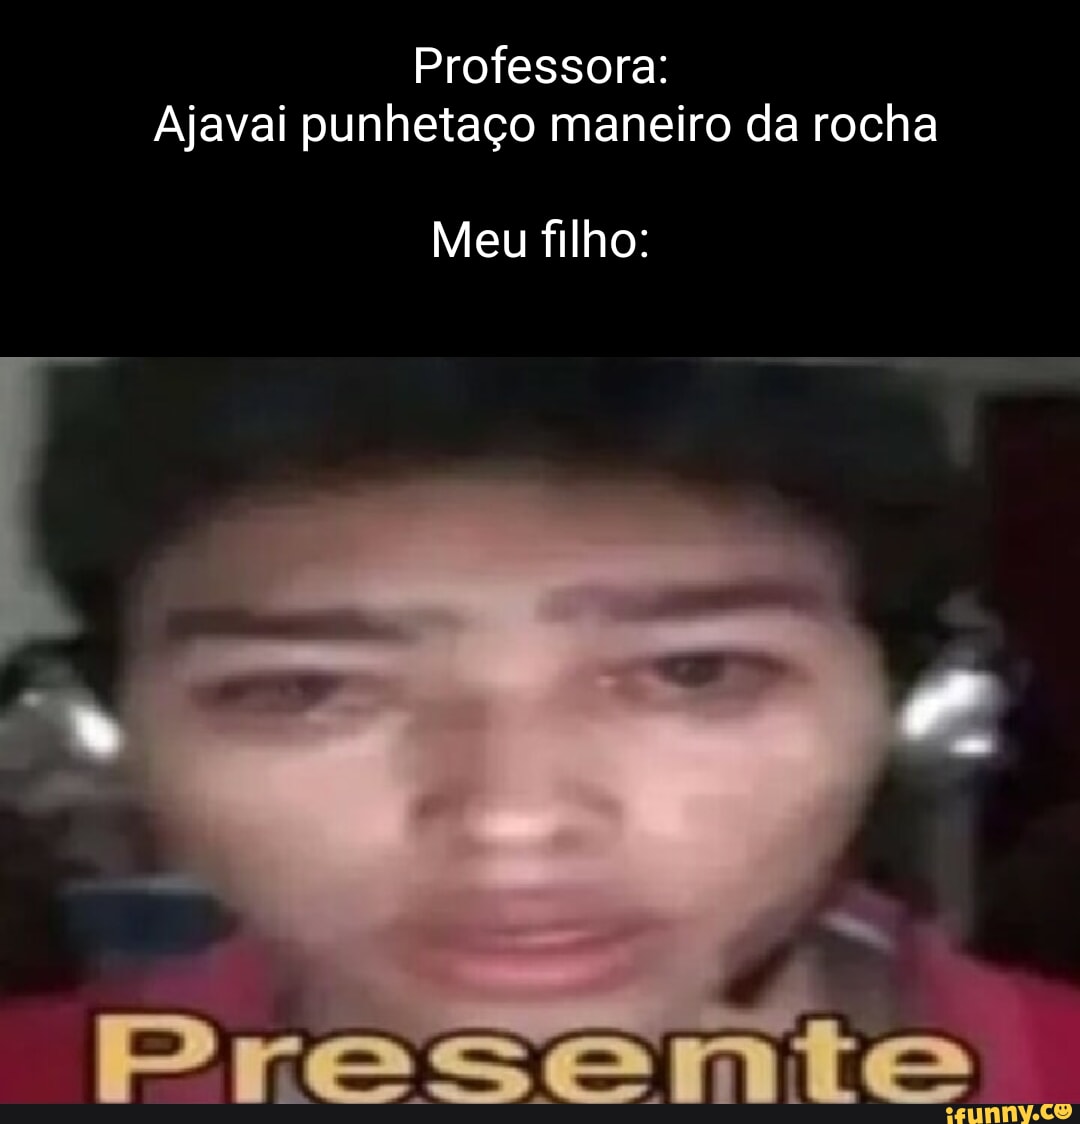 Trocha memes. Best Collection of funny Trocha pictures on iFunny Brazil